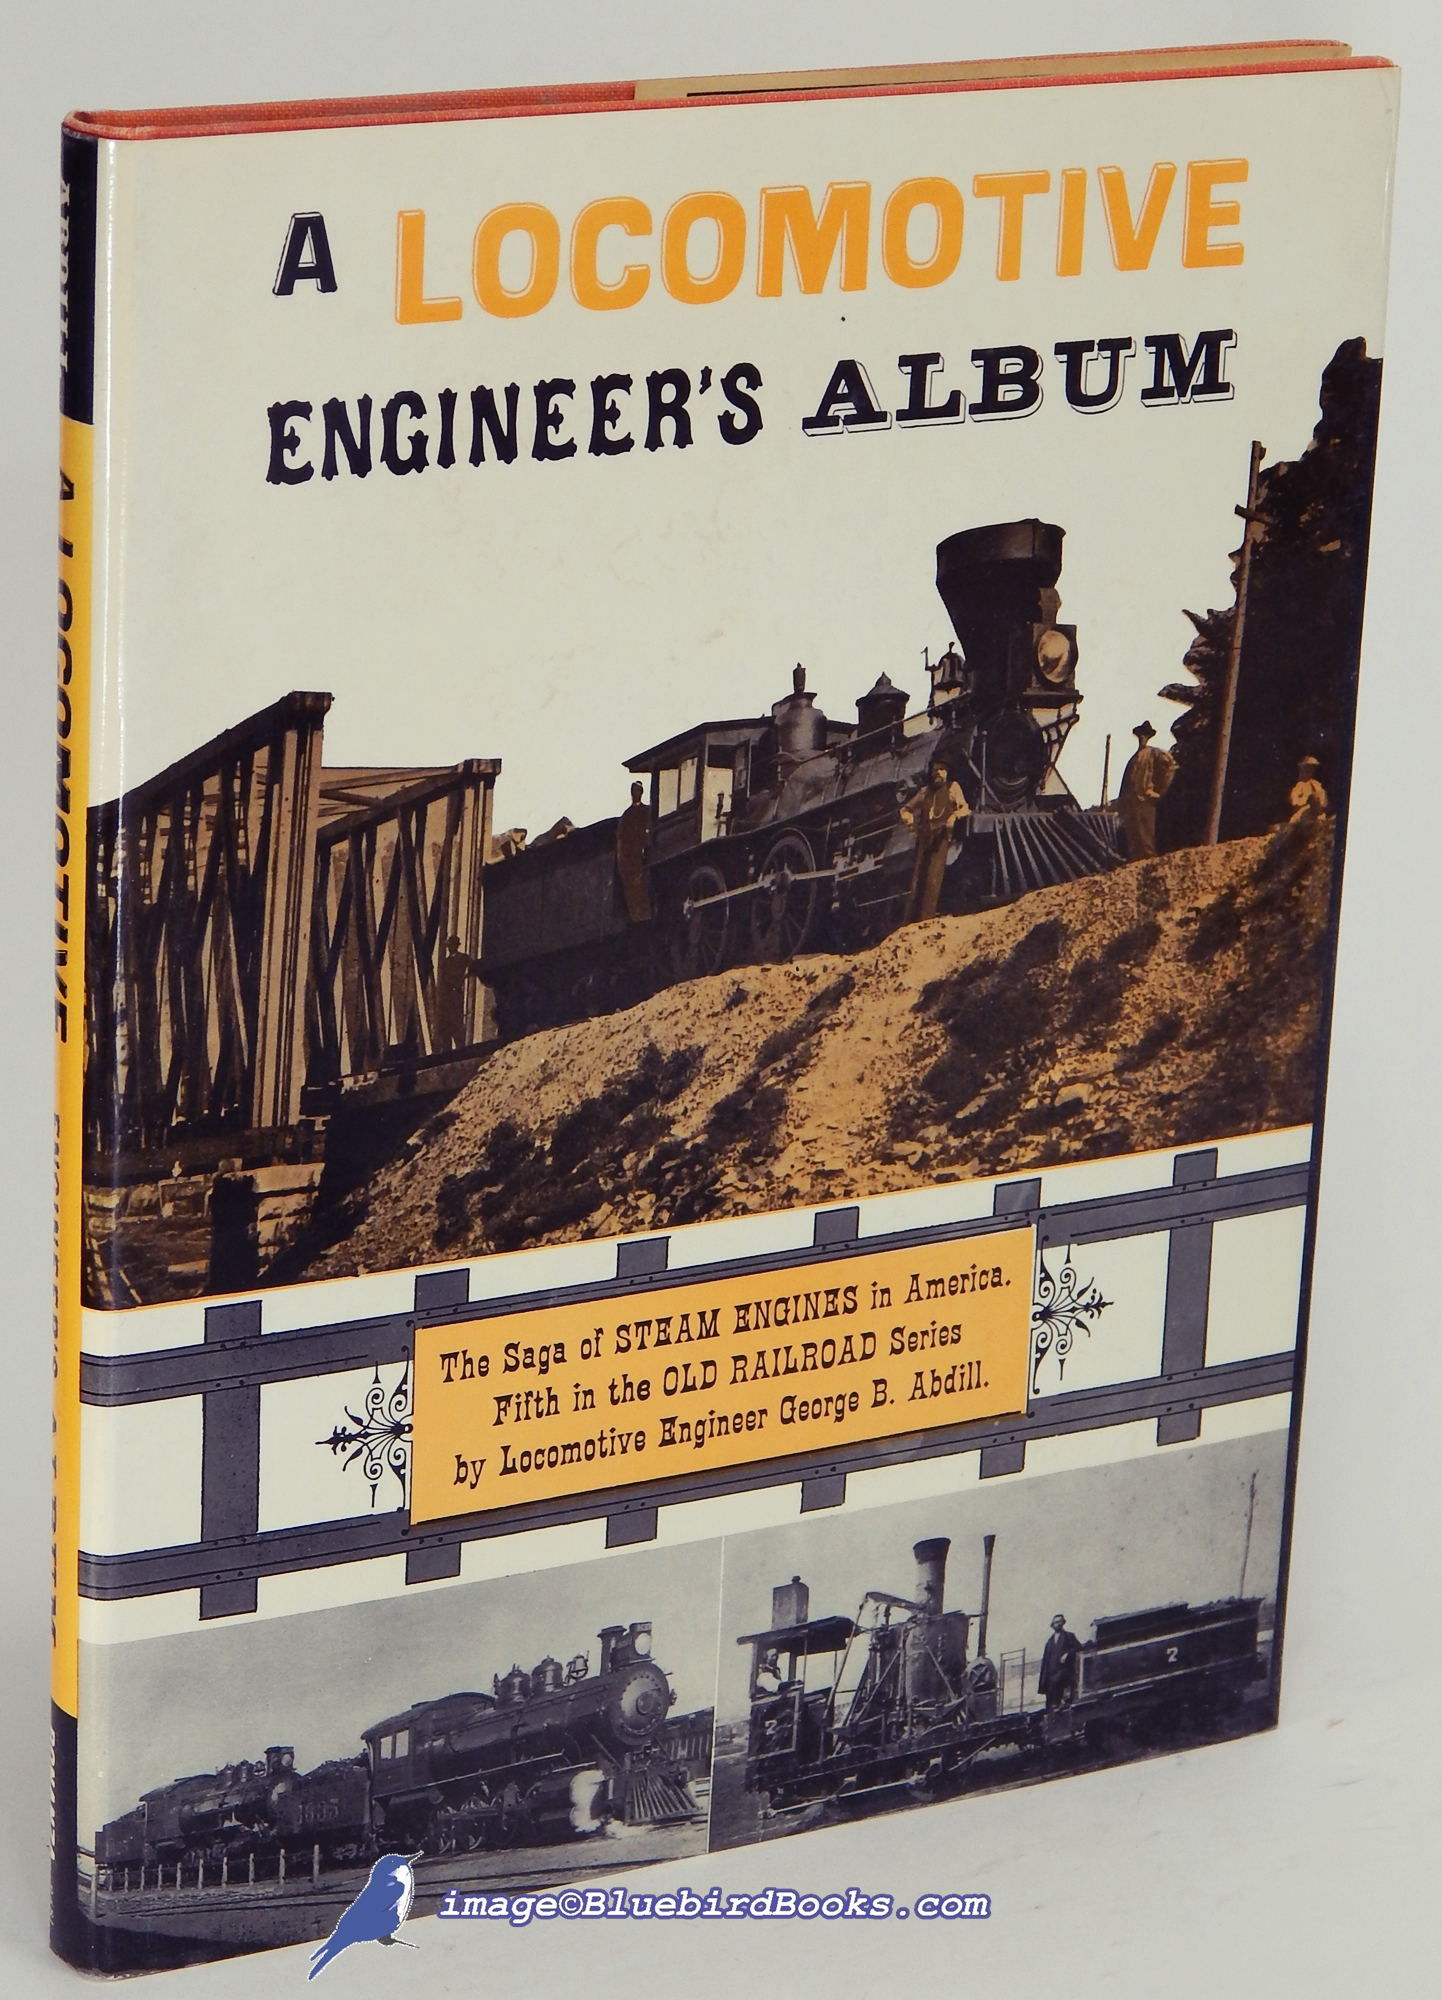 ABDILL, GEORGE B. - A Locomotive Engineer's Album: The Saga of Steam Engines in America, Fifth in the Old Railroad Series